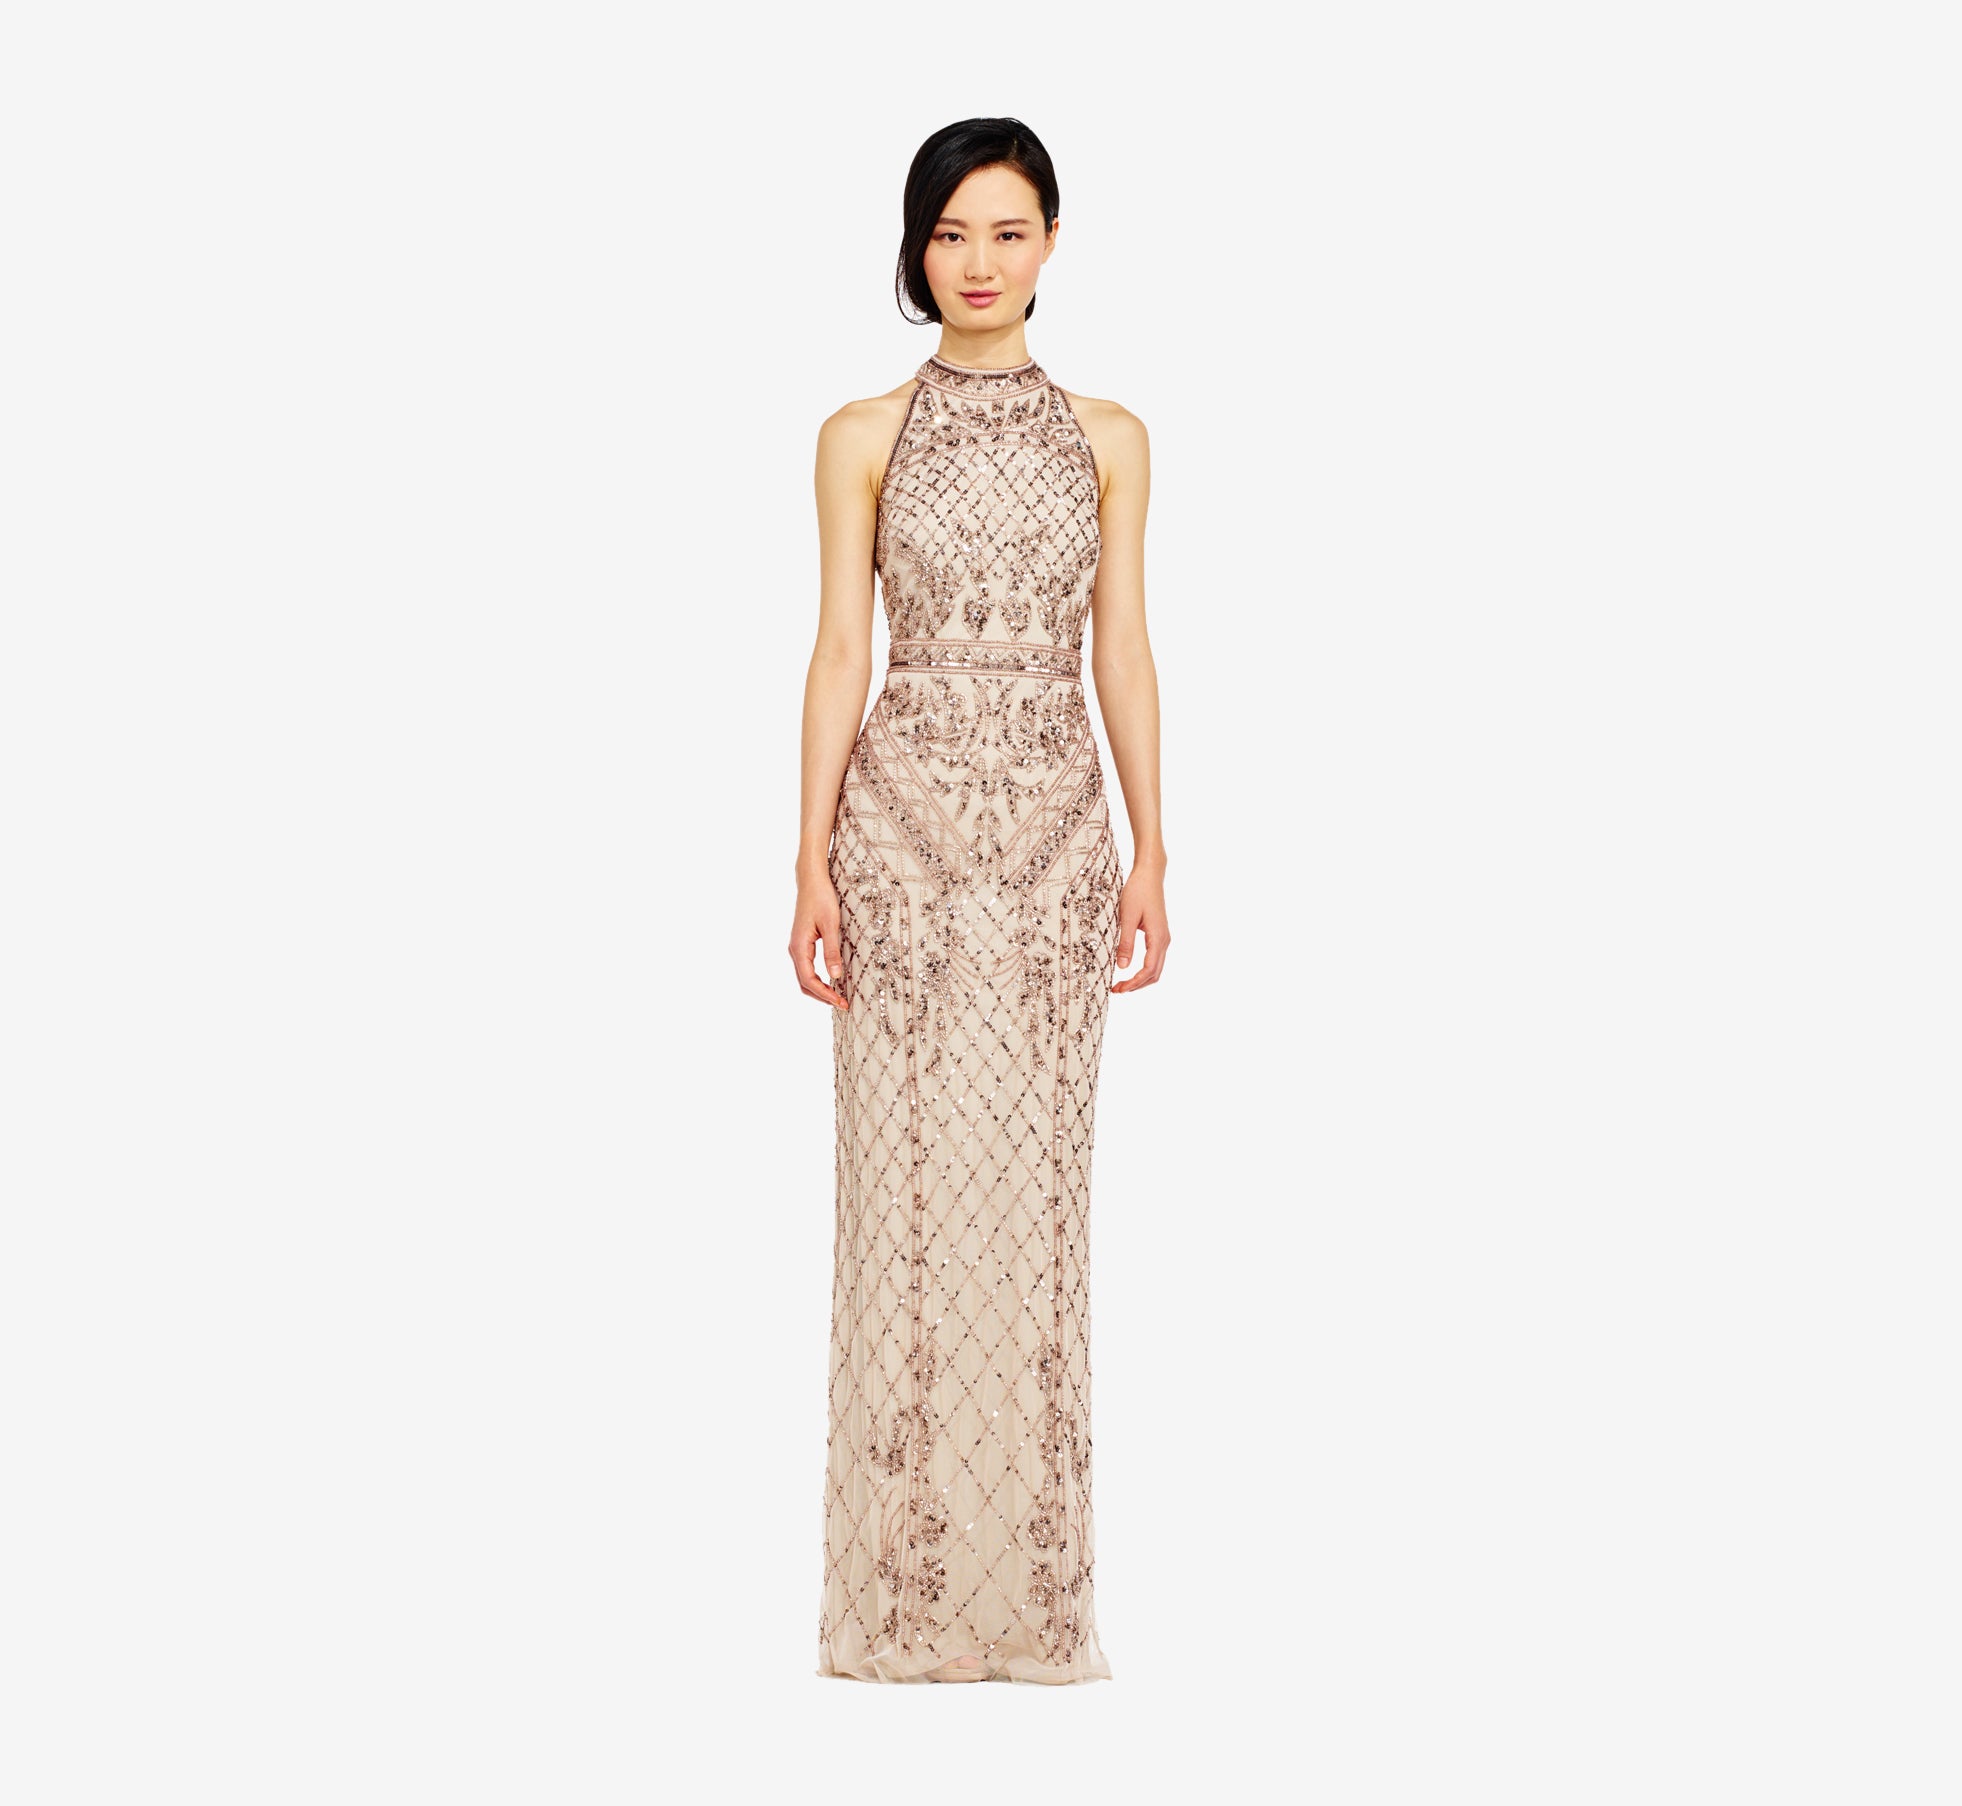 Adrianna Papell - Shop Dresses, Gowns, Jumpsuits More